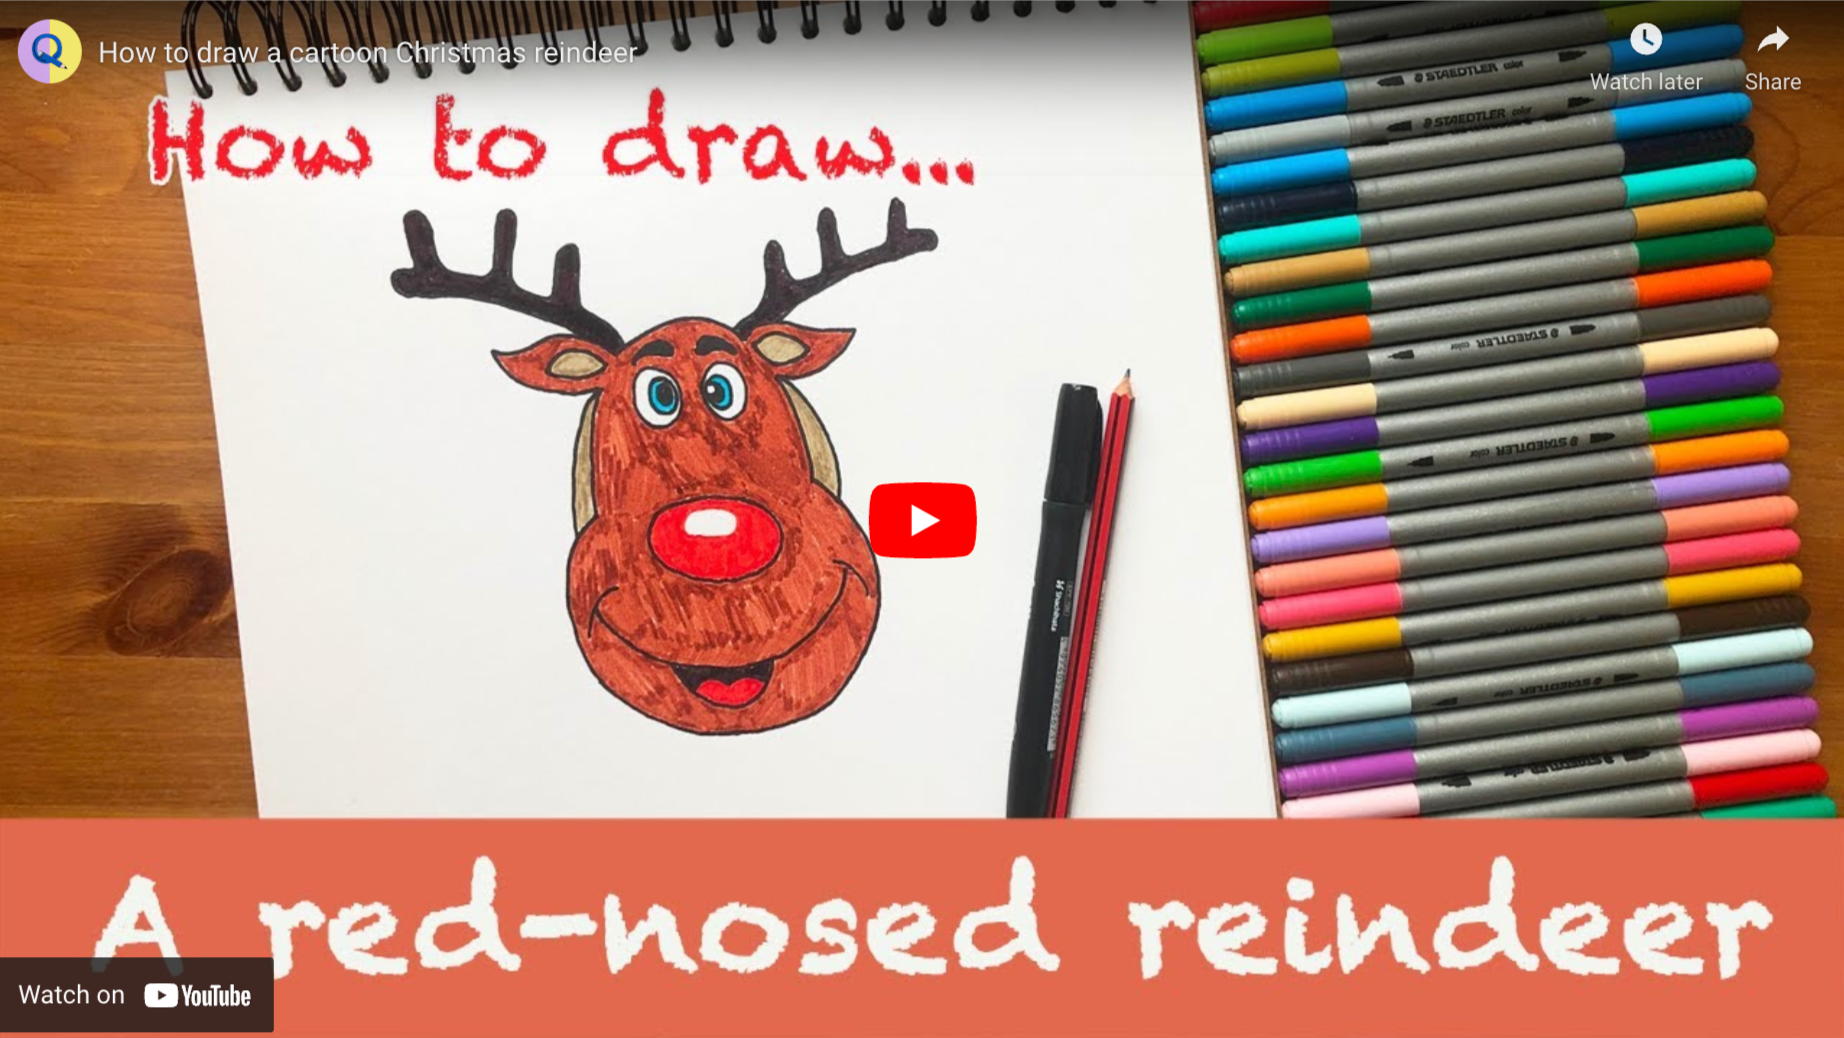 Load video: How to draw a Christmas reindeer